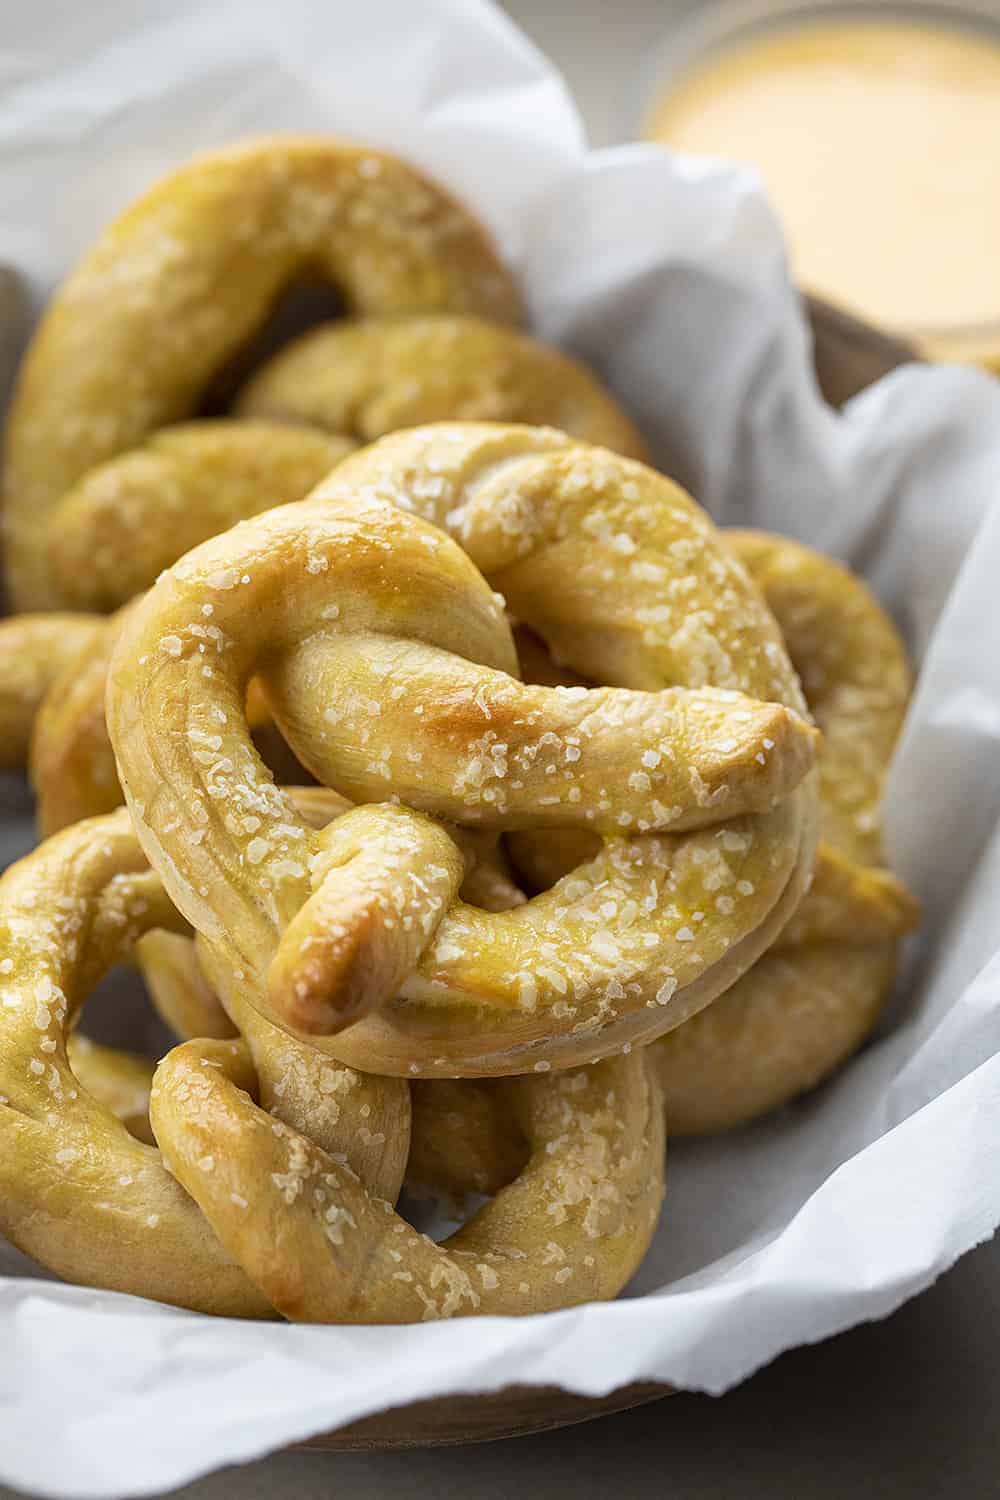 Basket of Sourdough Pretzels with Cheese Sauce in Background